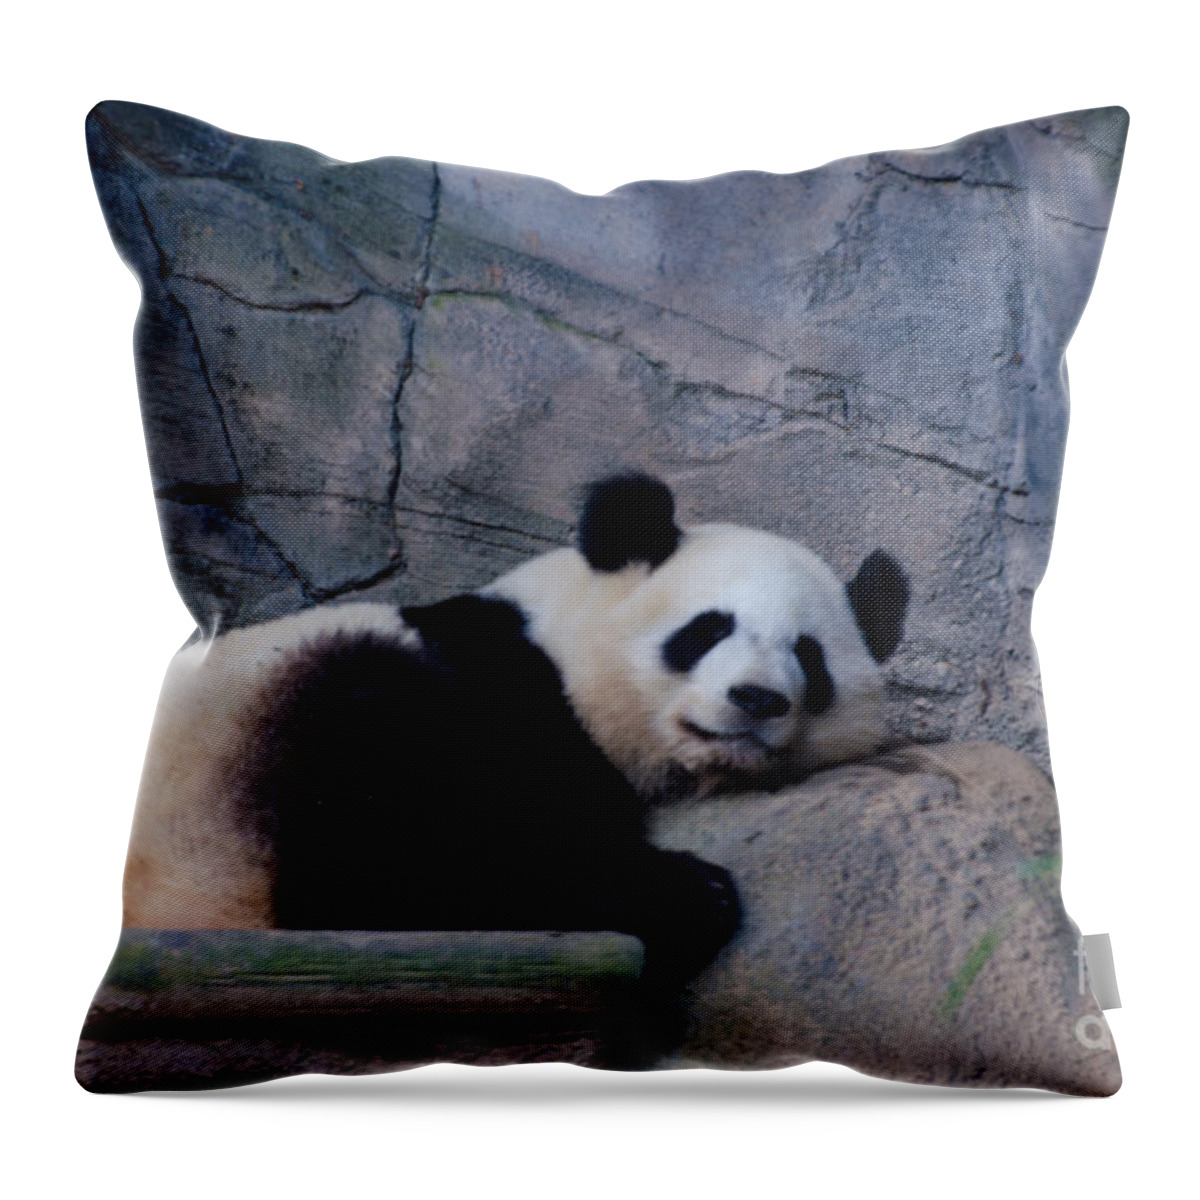 Giant Panda Throw Pillow featuring the photograph Giant Panda by Donna Brown